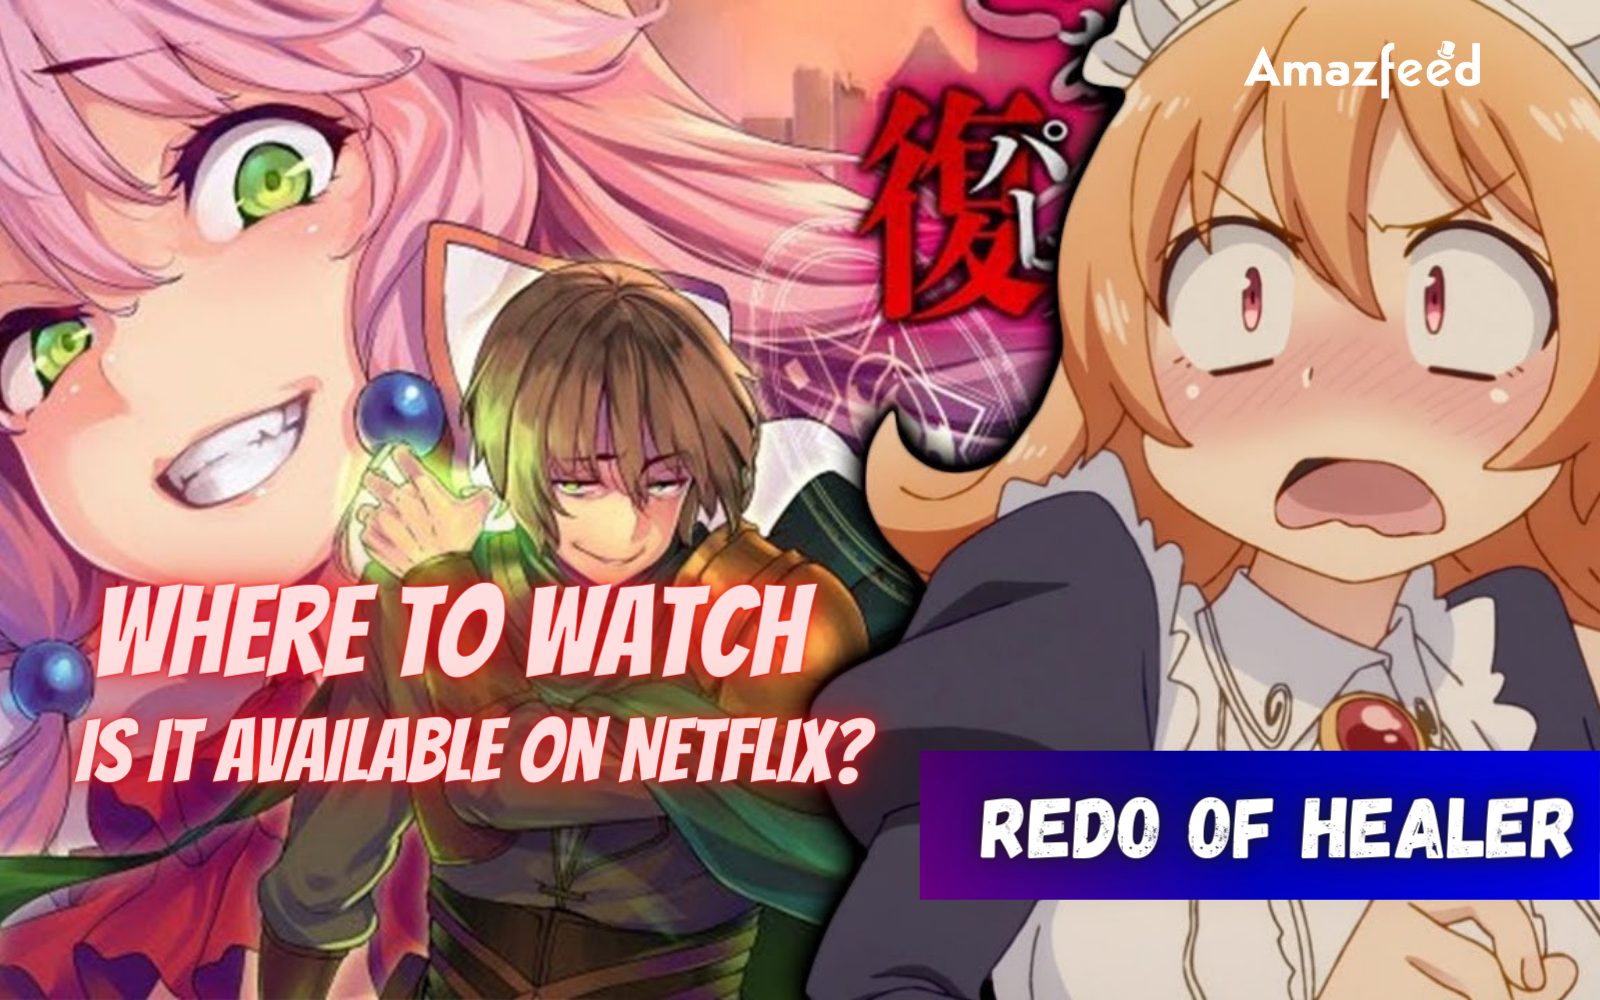 How to watch Redo of Healer: Streaming for new anime explained